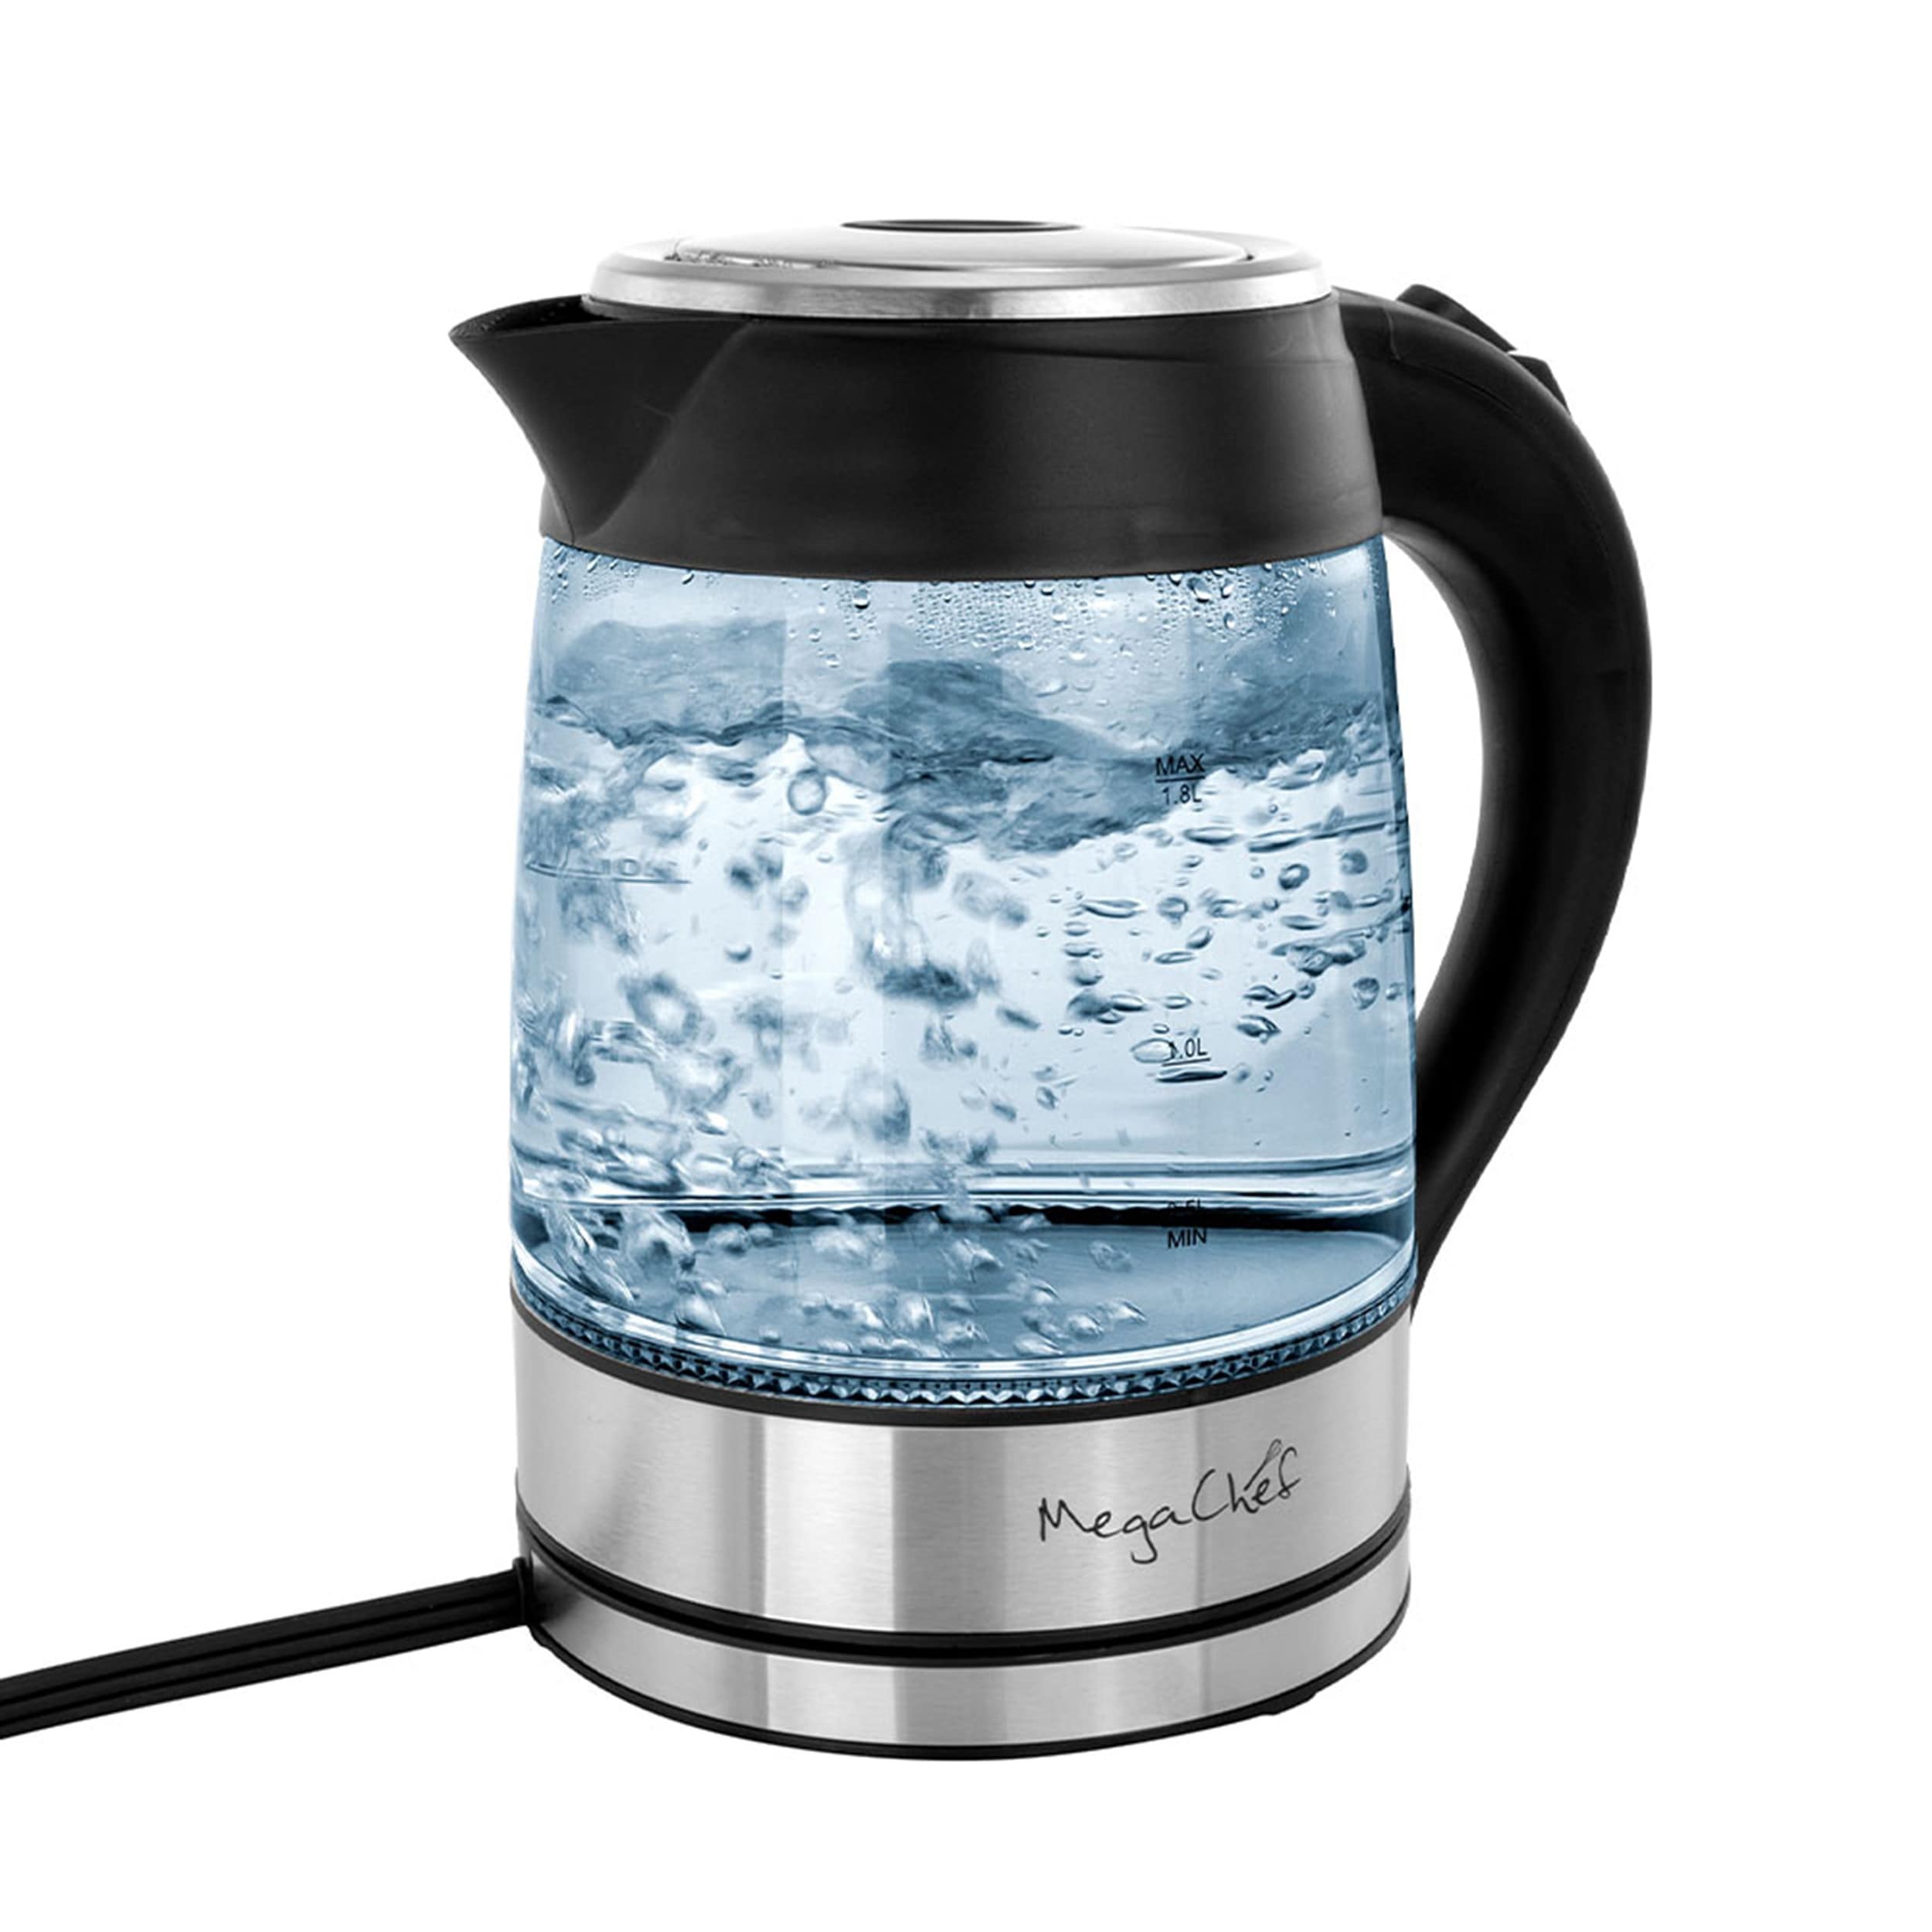 MegaChef 1.8Lt. Glass Tea Kettle with Electric Base